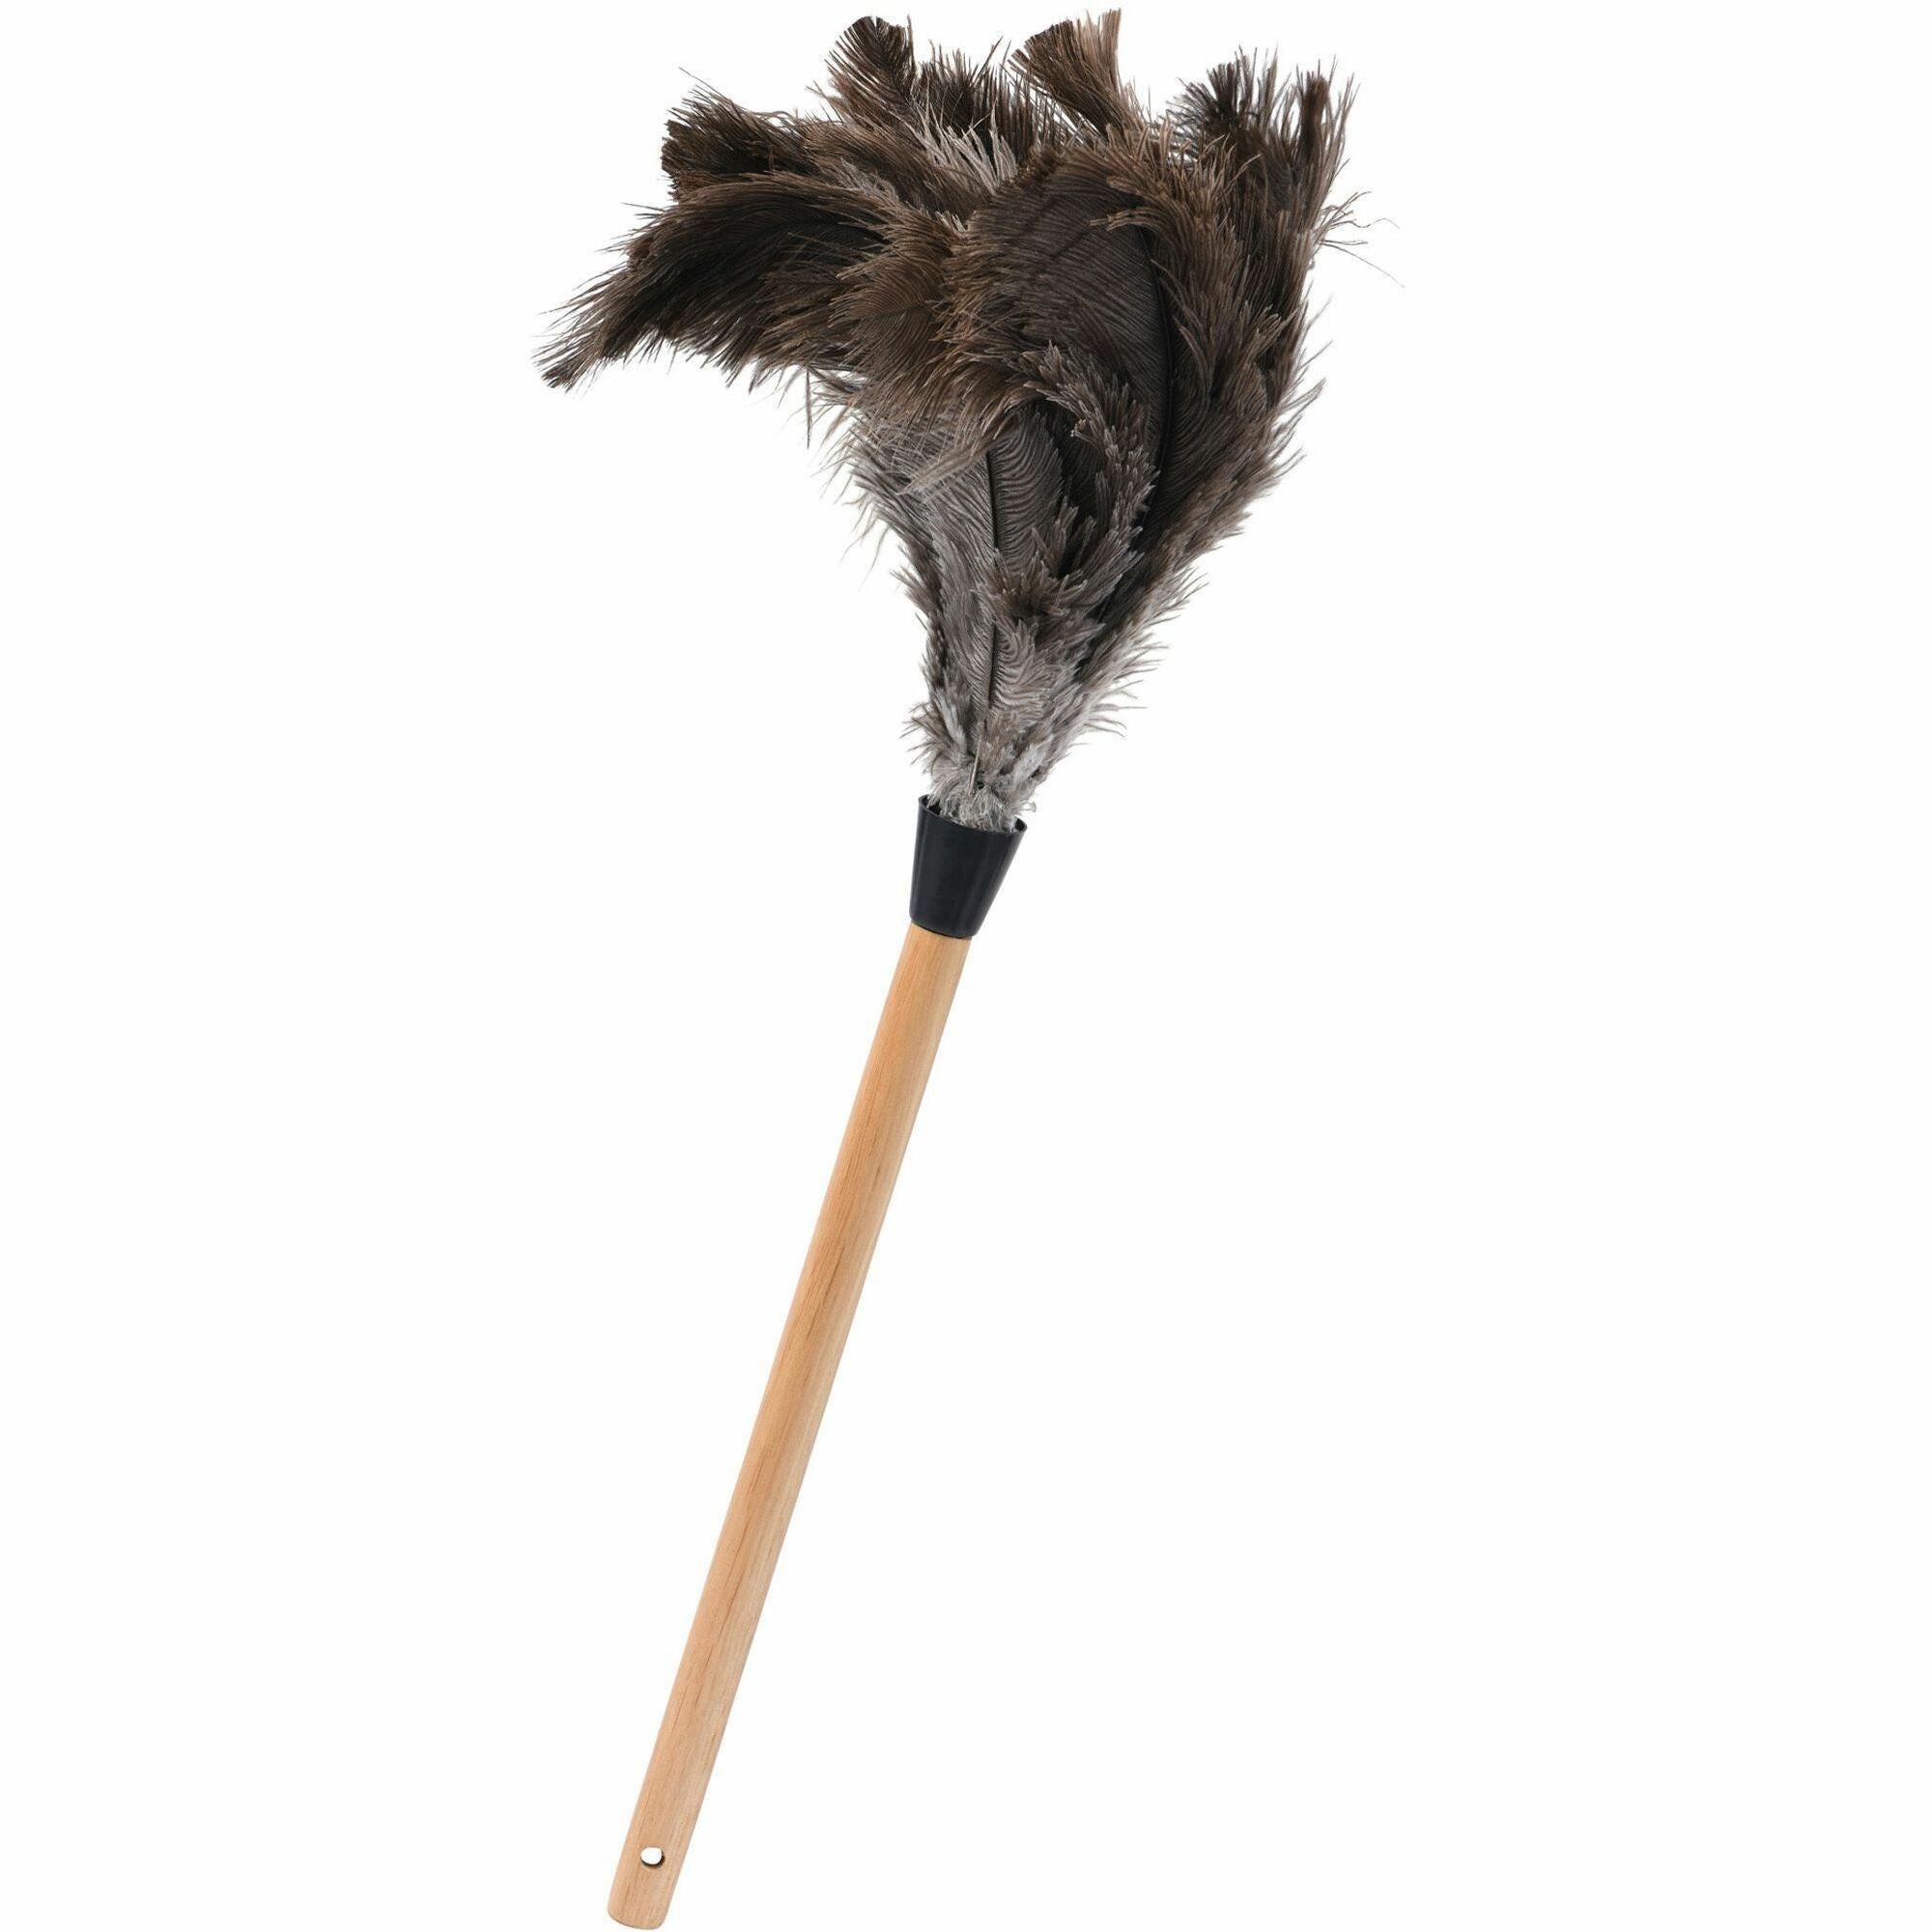 tatco-feather-duster-12-handle-length-23-overall-length-wood-handle-1-each-brown_tco41300 - 1